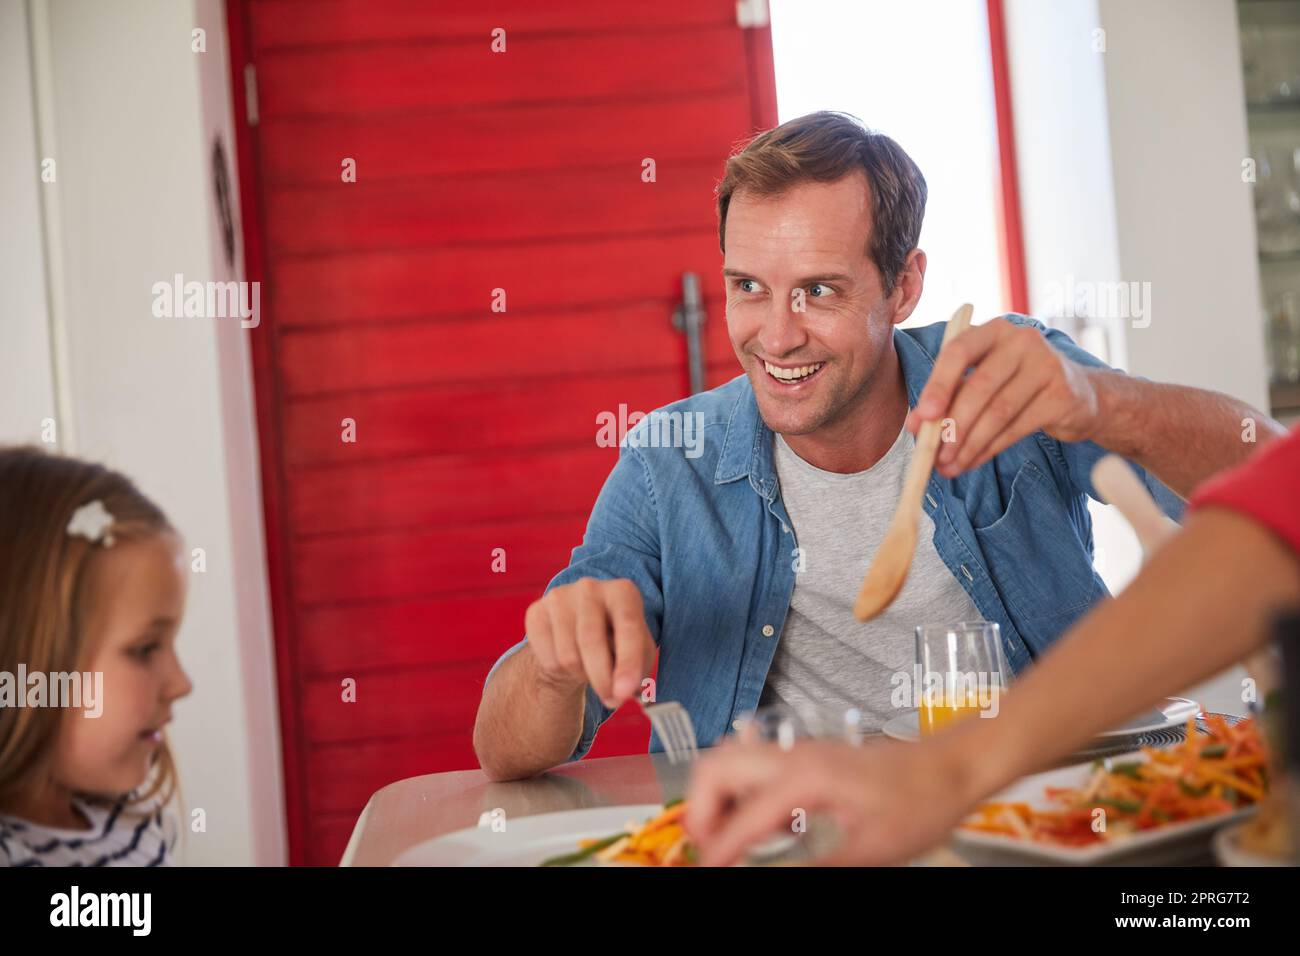 Good food, good mood. a happy family enjoying a home-cooked meal together at the table. Stock Photo